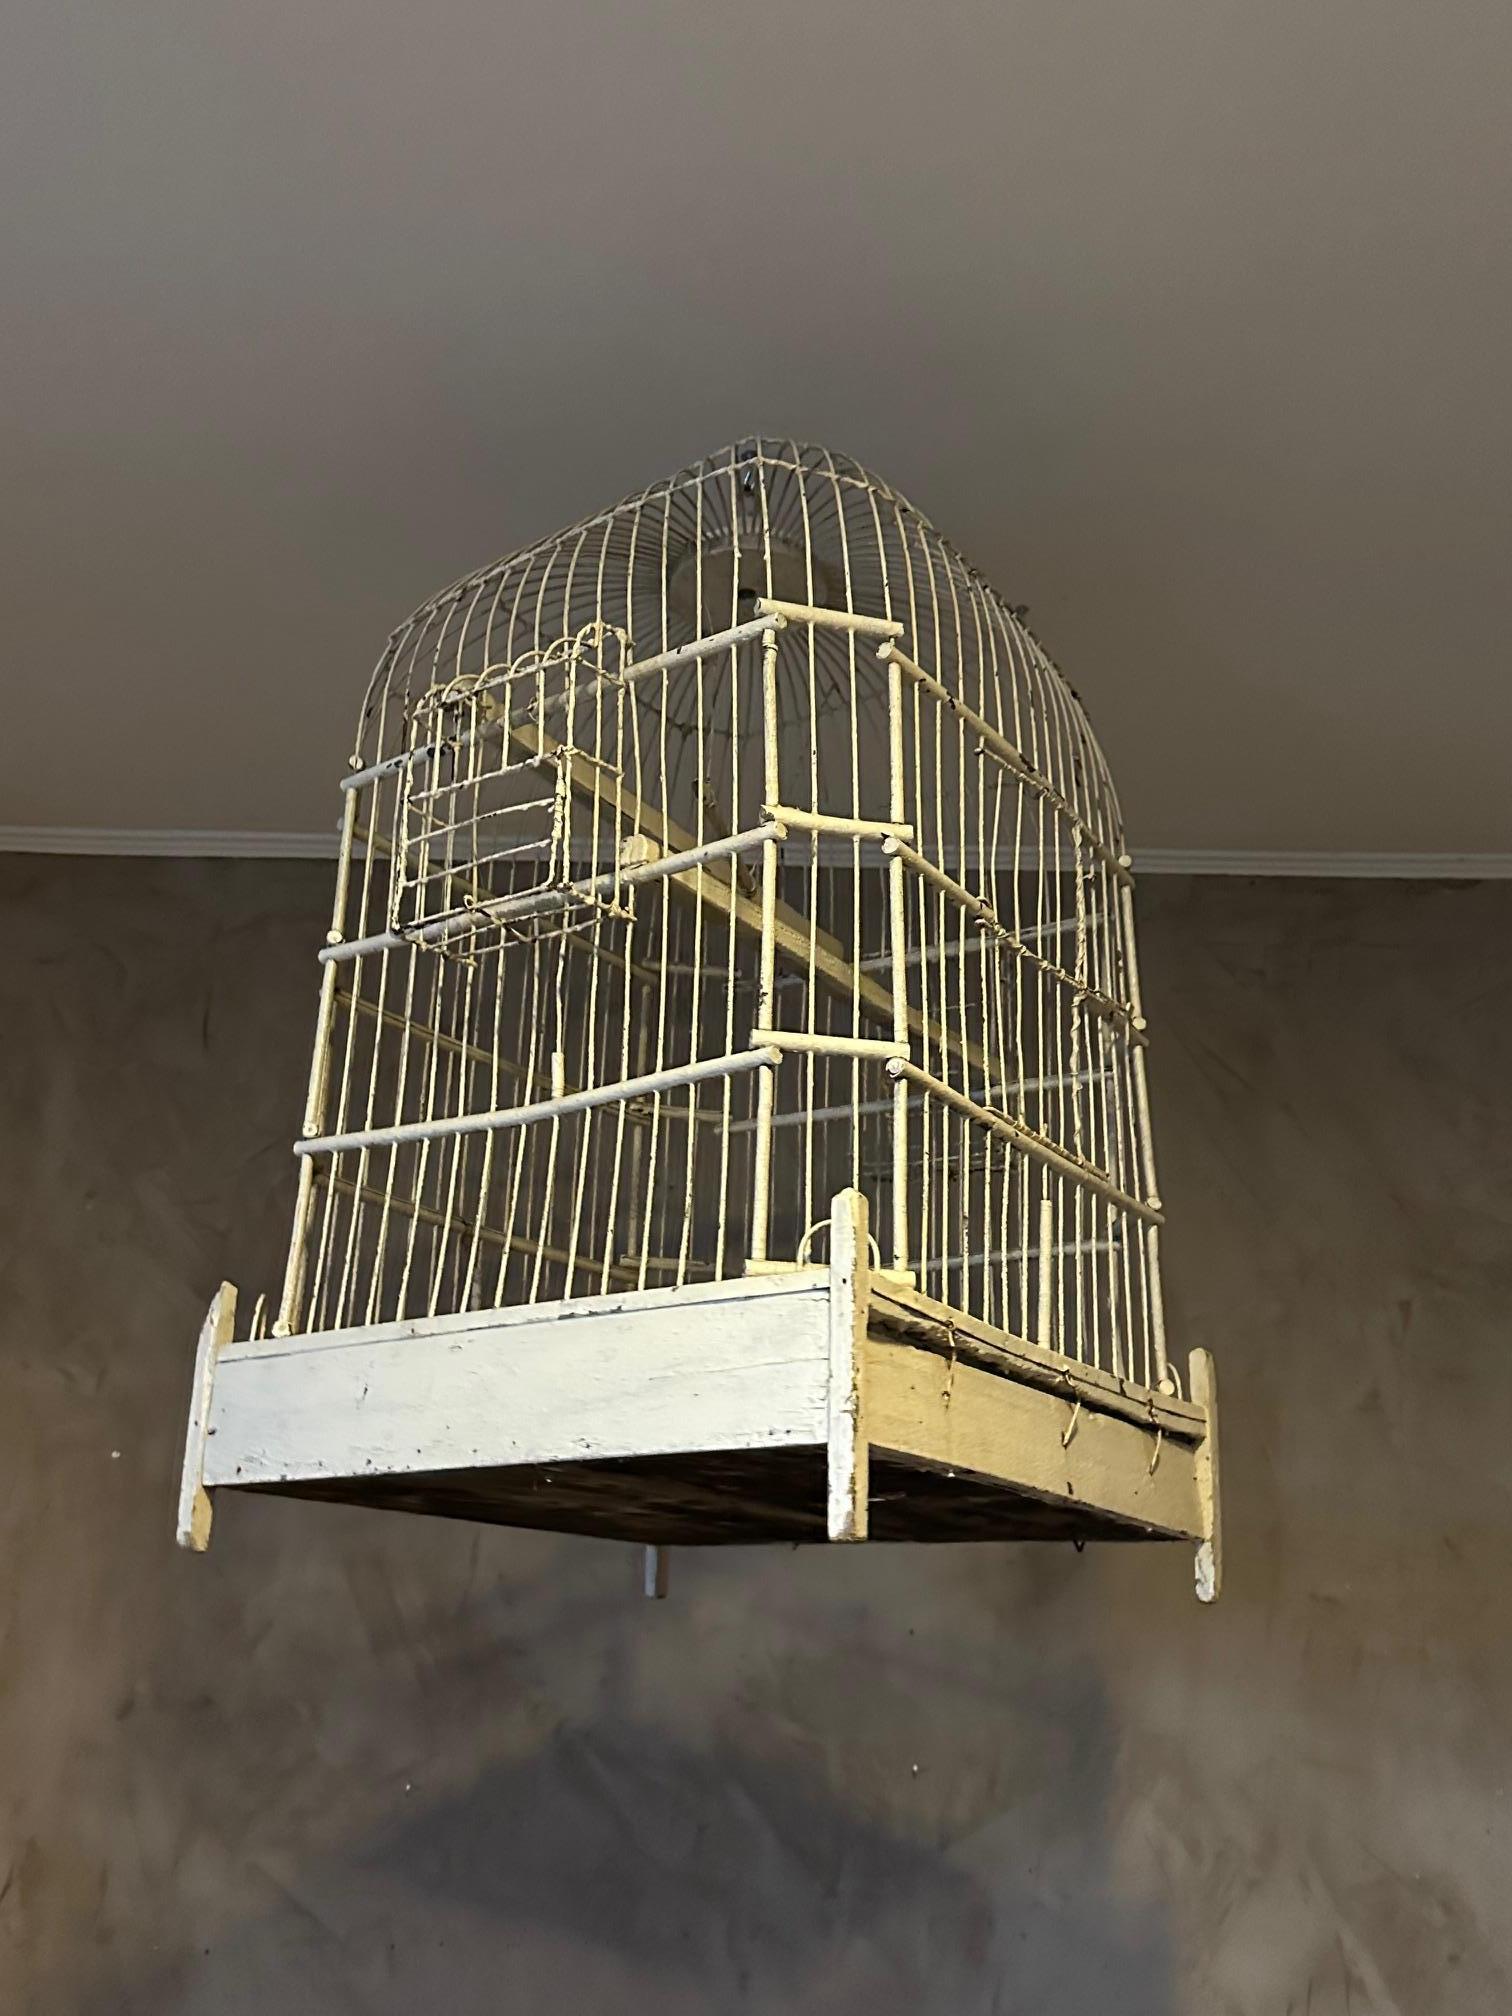 20th century French Painted Metal and Wood Bird Cage, 1920s For Sale 6